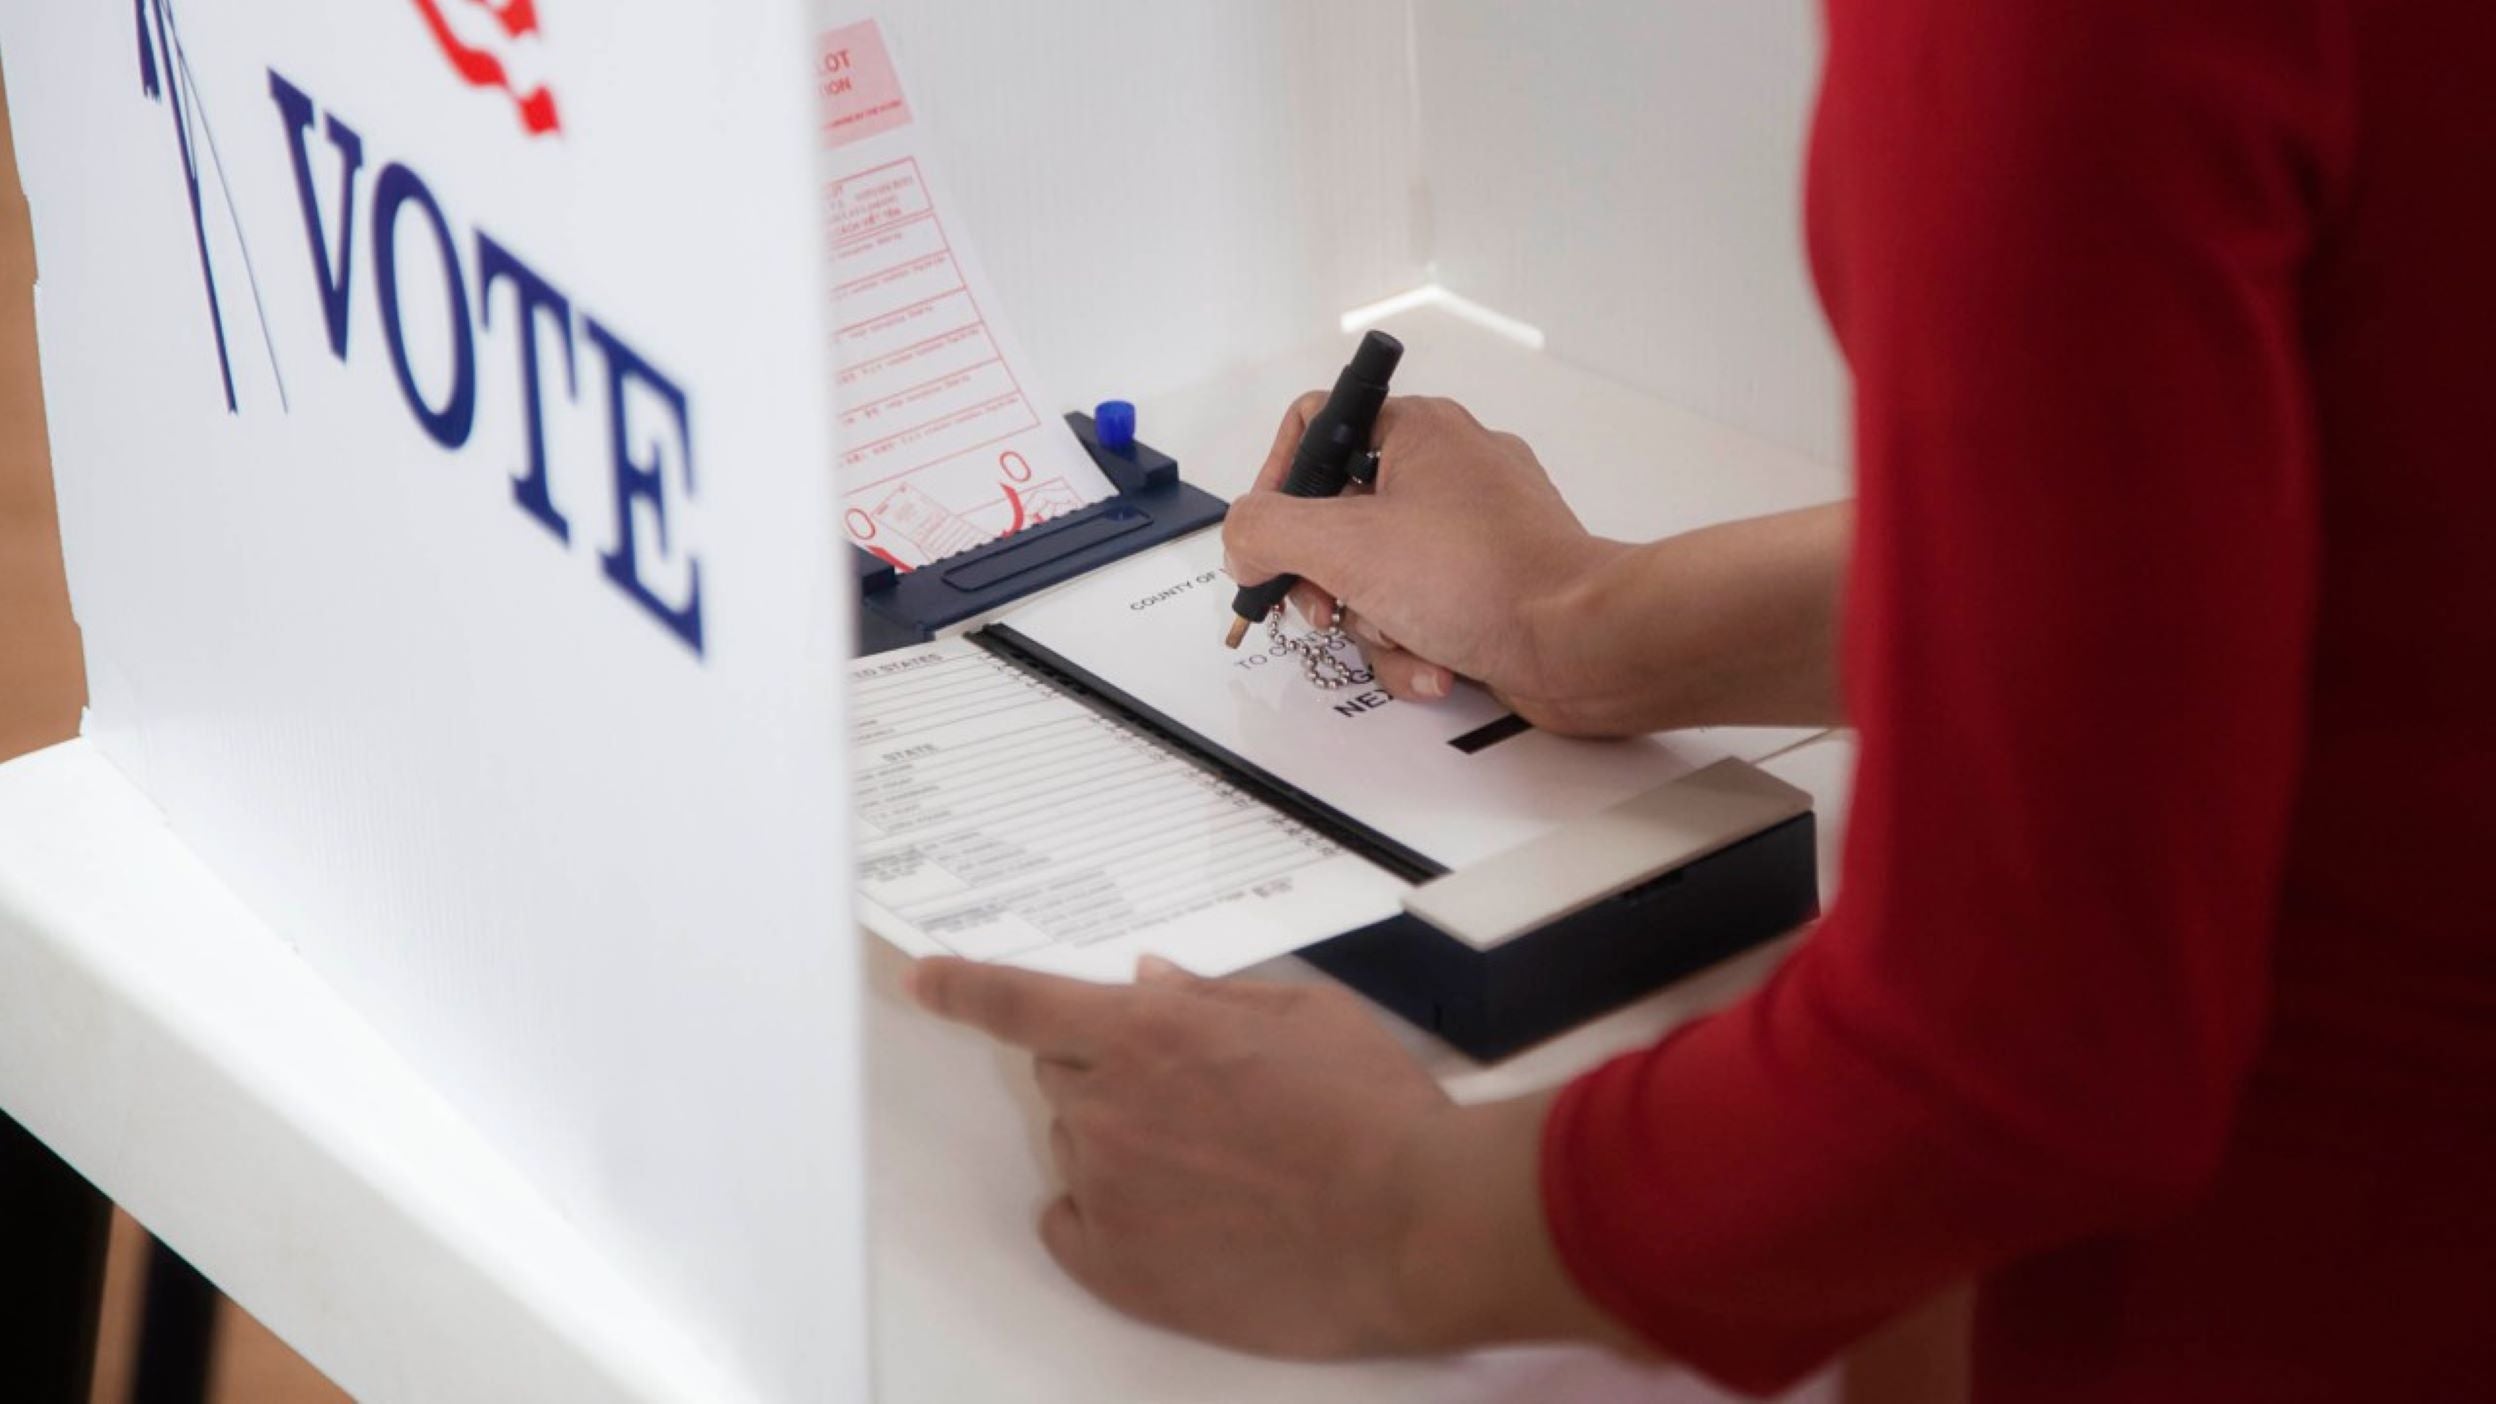 Will the mishandling of classified documents be an issue at the polls?